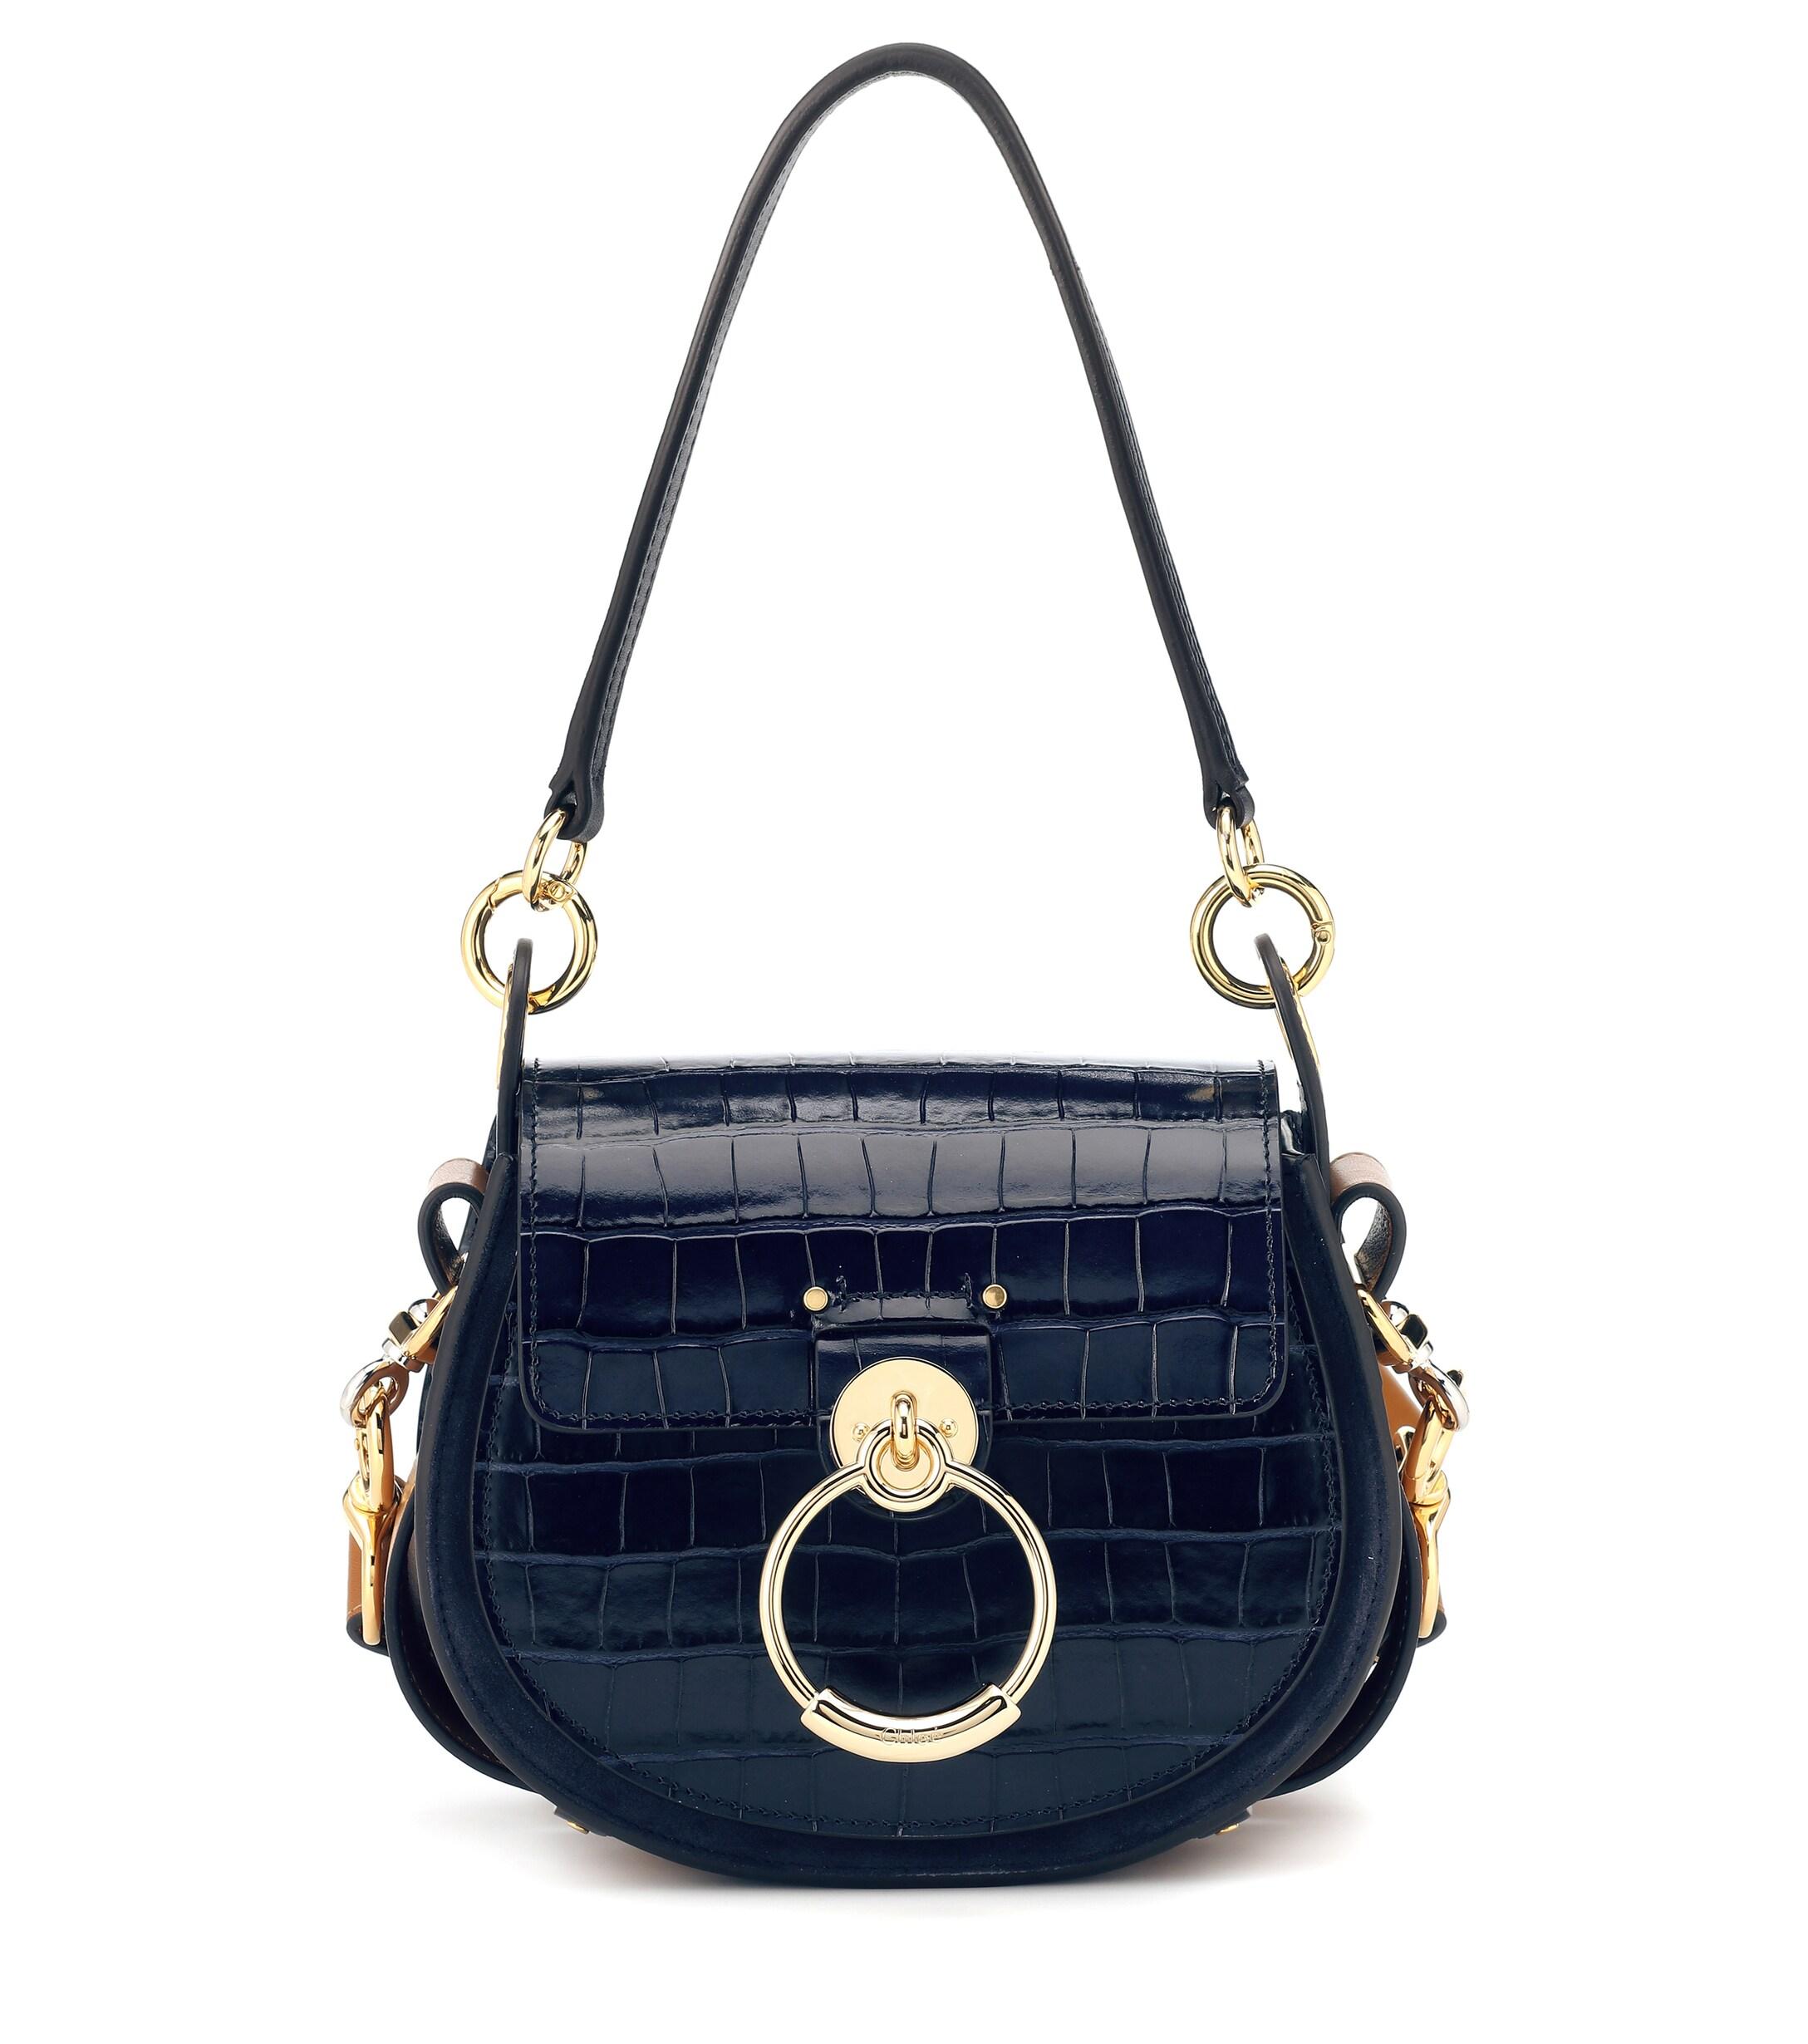 Chloé Tess Small Leather Shoulder Bag in Navy (Blue) - Save 47% - Lyst